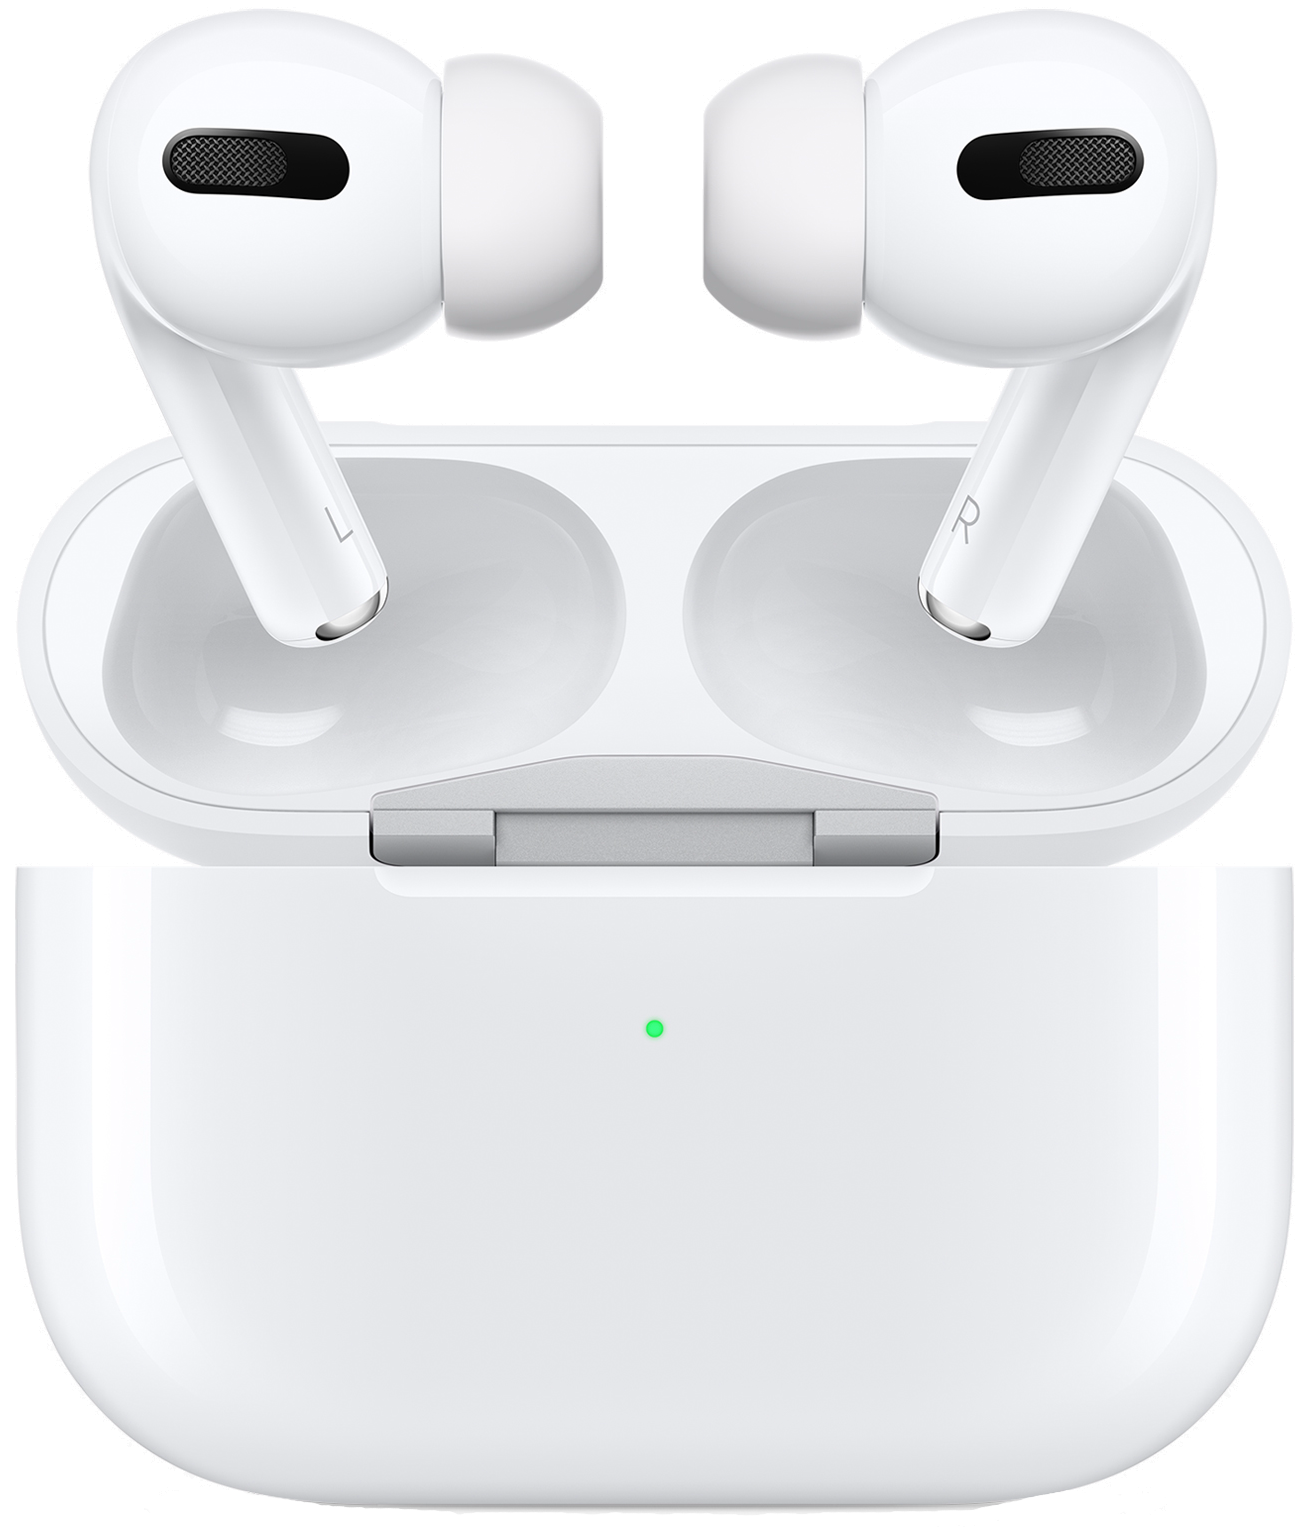 Manhattan Pelmel imbik  AirPods Pro vs. AirPods 2: What's the difference (and should you upgrade)?  | iMore